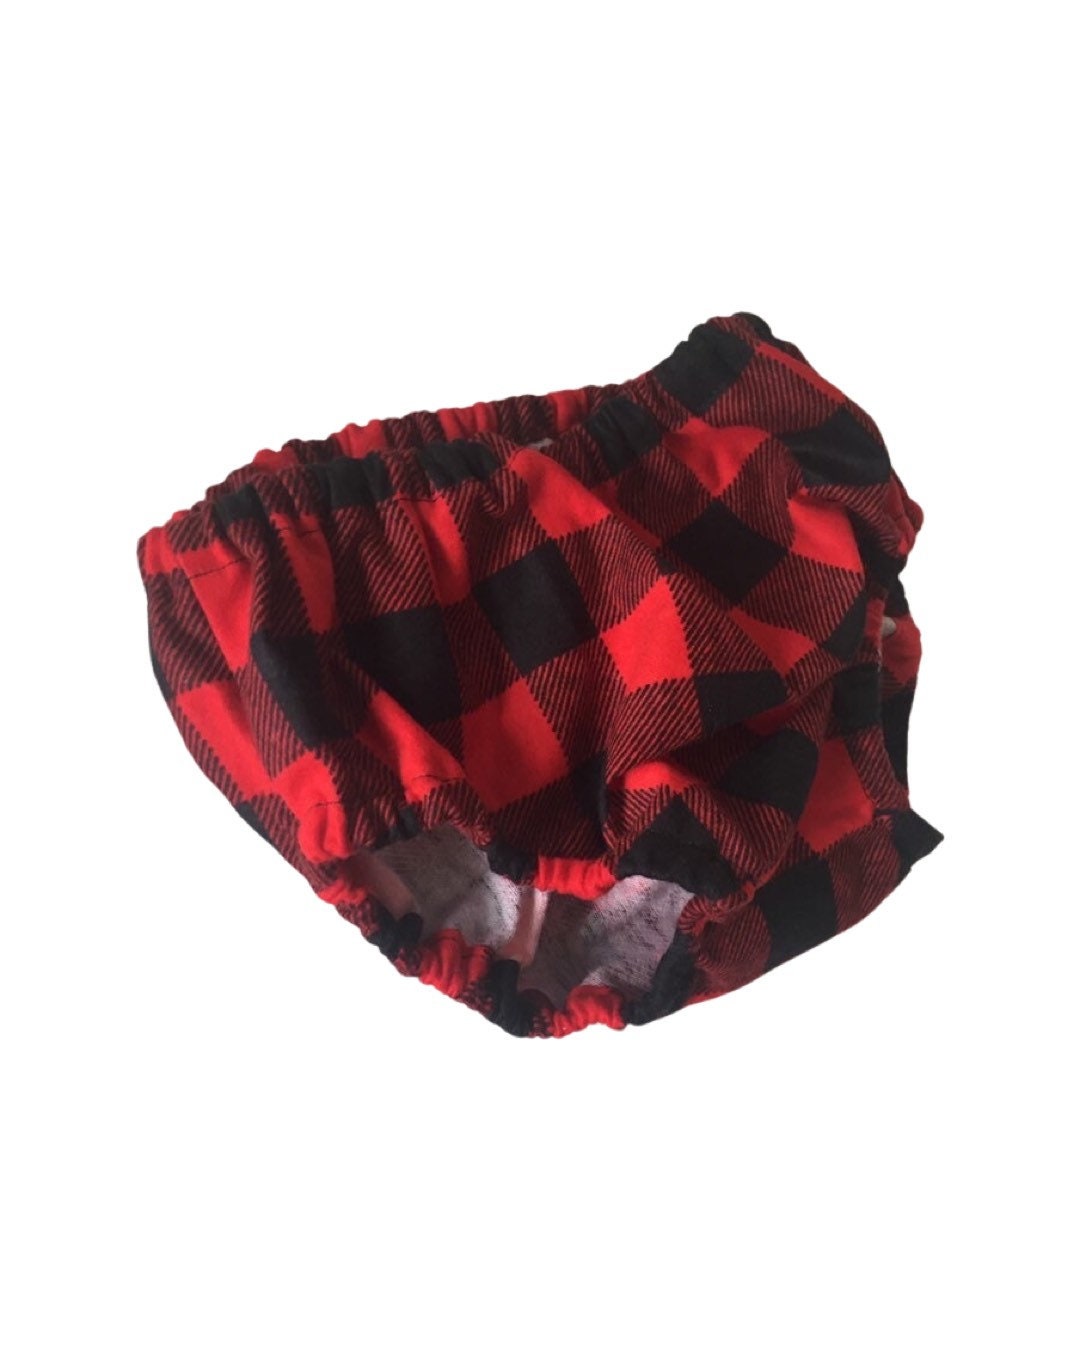 Baby Buffalo Plaid Diaper Cover, Baby Diaper Cover, Woodlands Theme Diaper  Cover, Red and Black Check Diaper Cover, Lumberjack Bloomers -  Canada